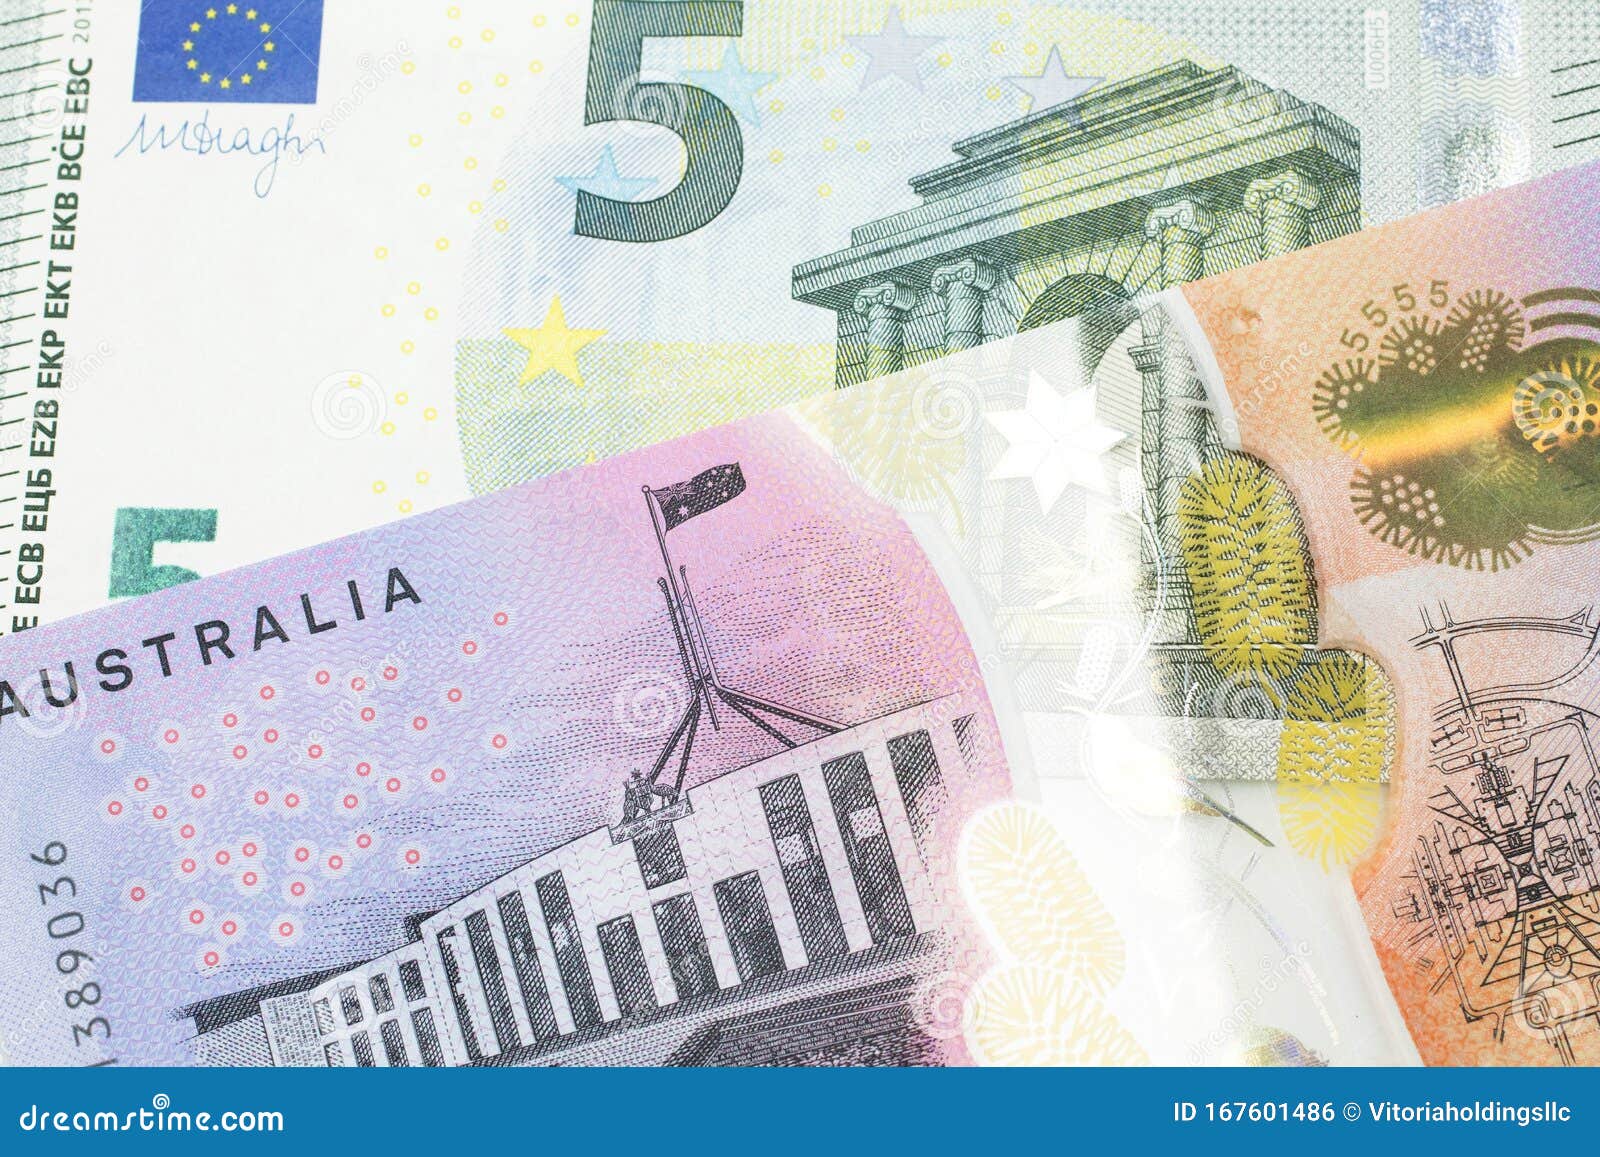 Currency from Australia with Money from the Union Stock Photo Image of macro: 167601486